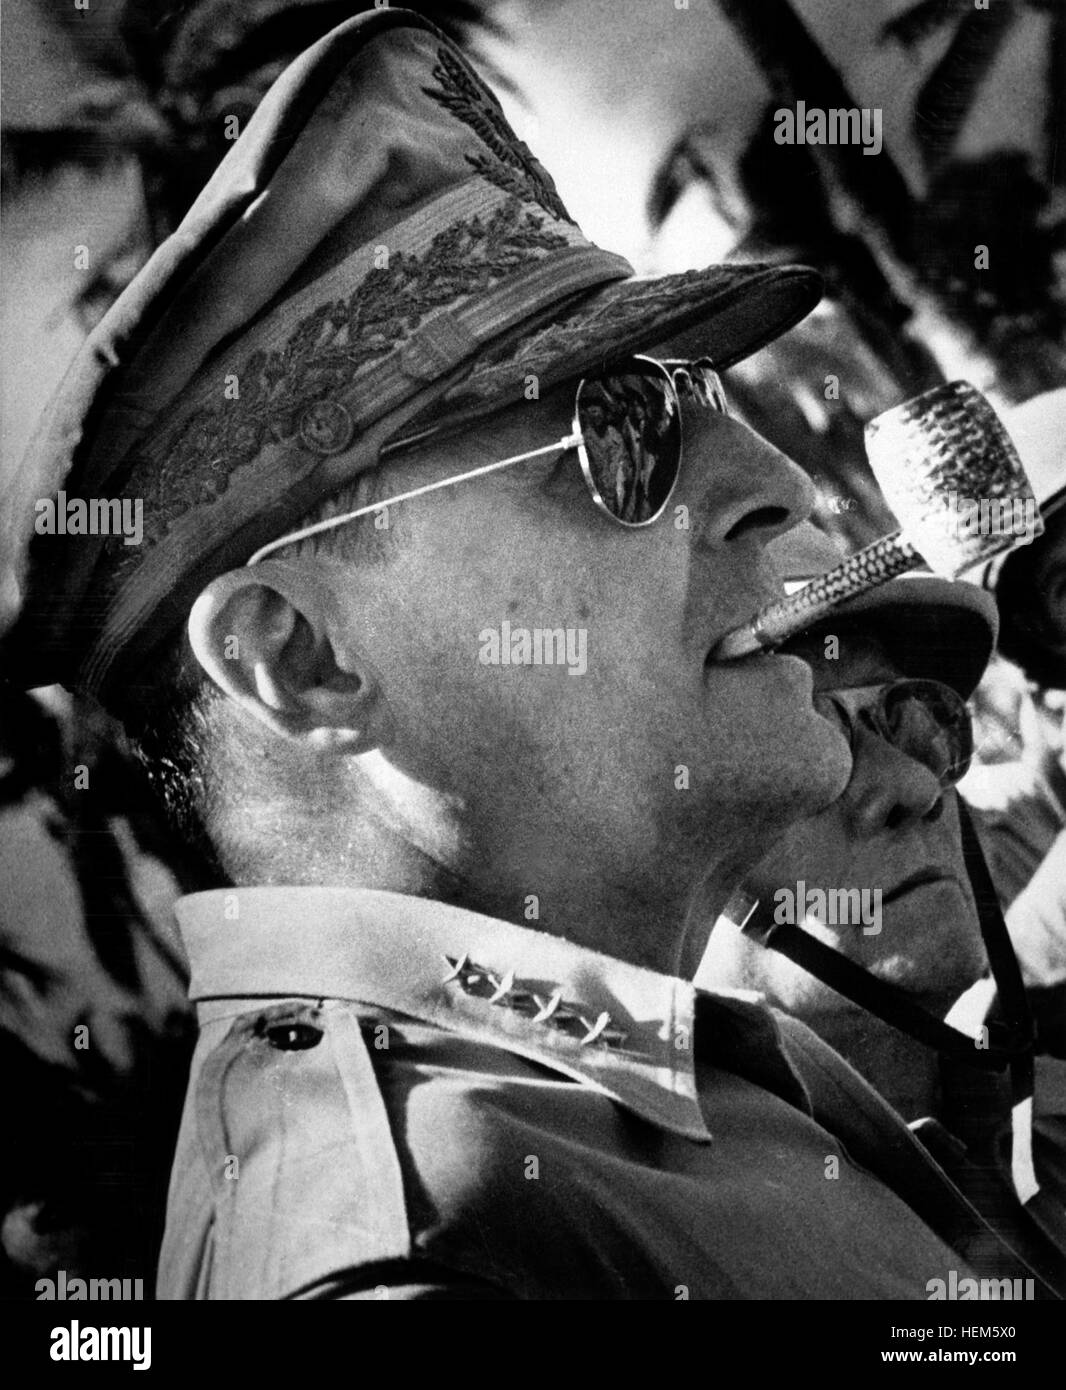 General MacArthur surveys the beachhead on Leyte Island, soon after American forces swept ashore from a gigantic liberation armada into the central Philippines, at the historic moment when the General made good his promise 'I shall return'.  1944. (Coast Guard) Exact Date Shot Unknown NARA FILE #:  026-G-3584 WAR & CONFLICT BOOK #:  744 DouglasMacArthur Stock Photo